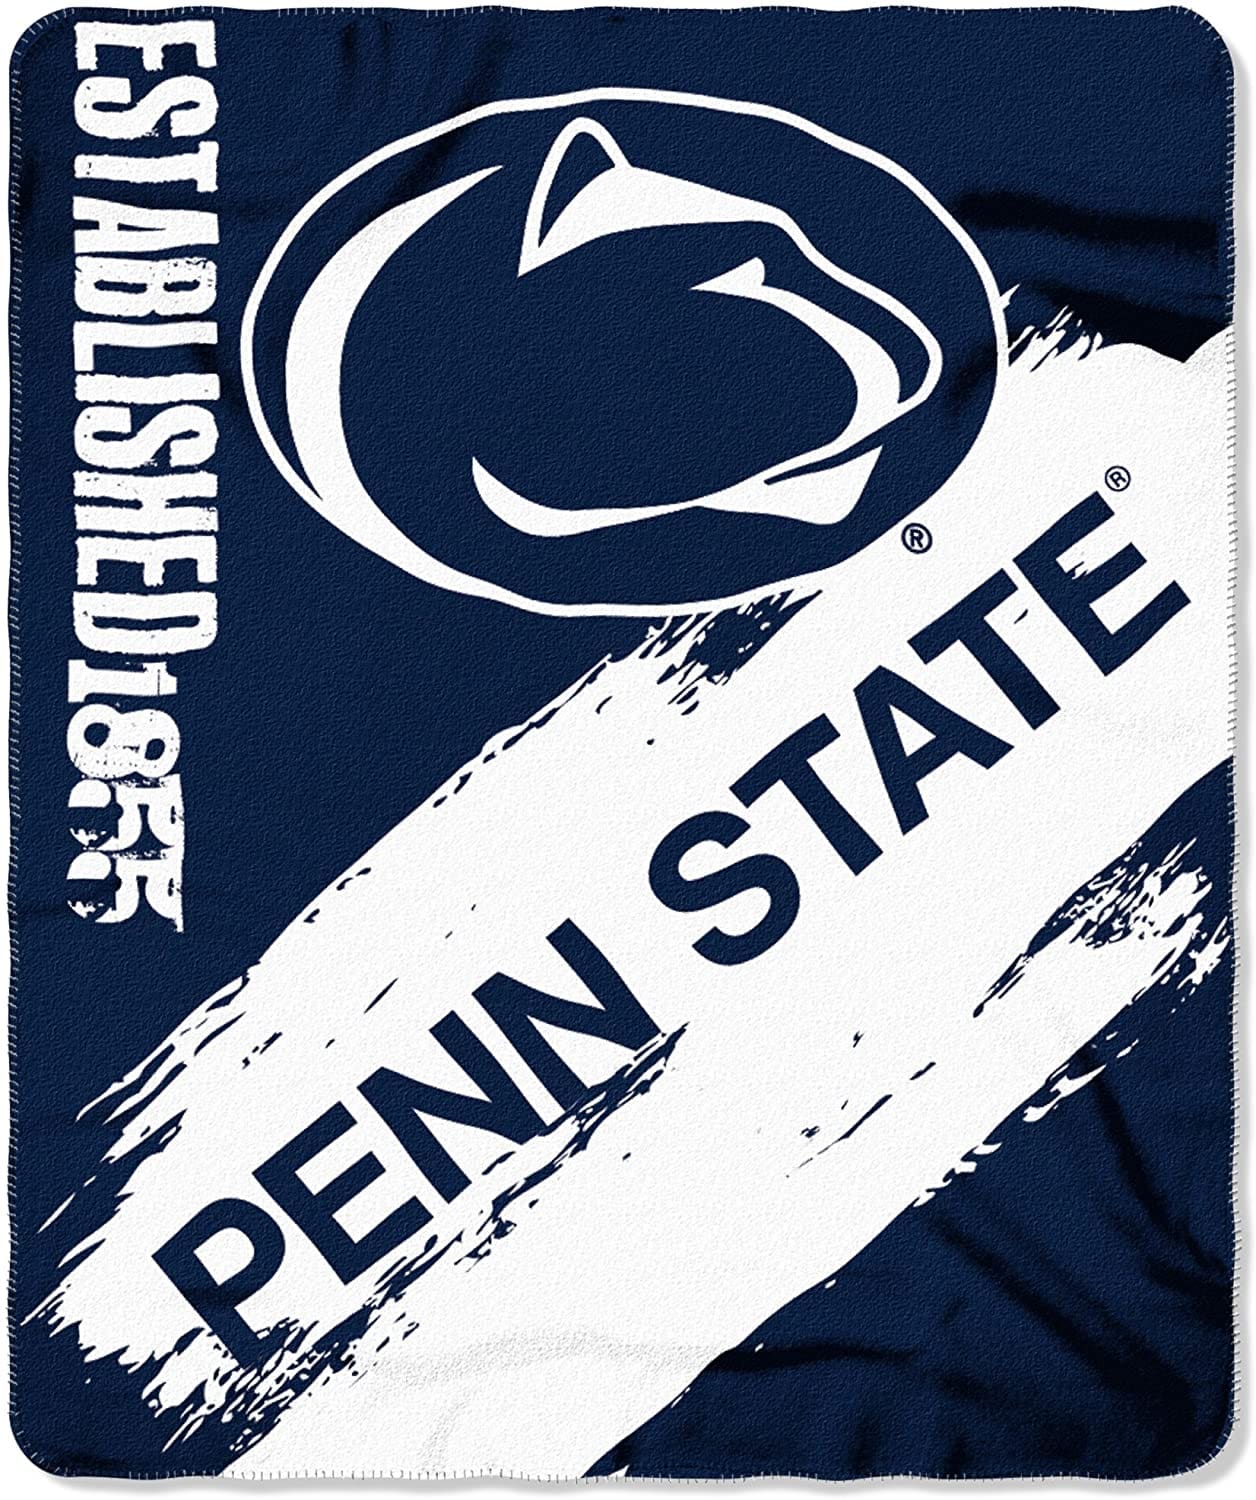 Officially Licensed Ncaa Printed Throw Penn State Nittany Lions Fleece Blanket